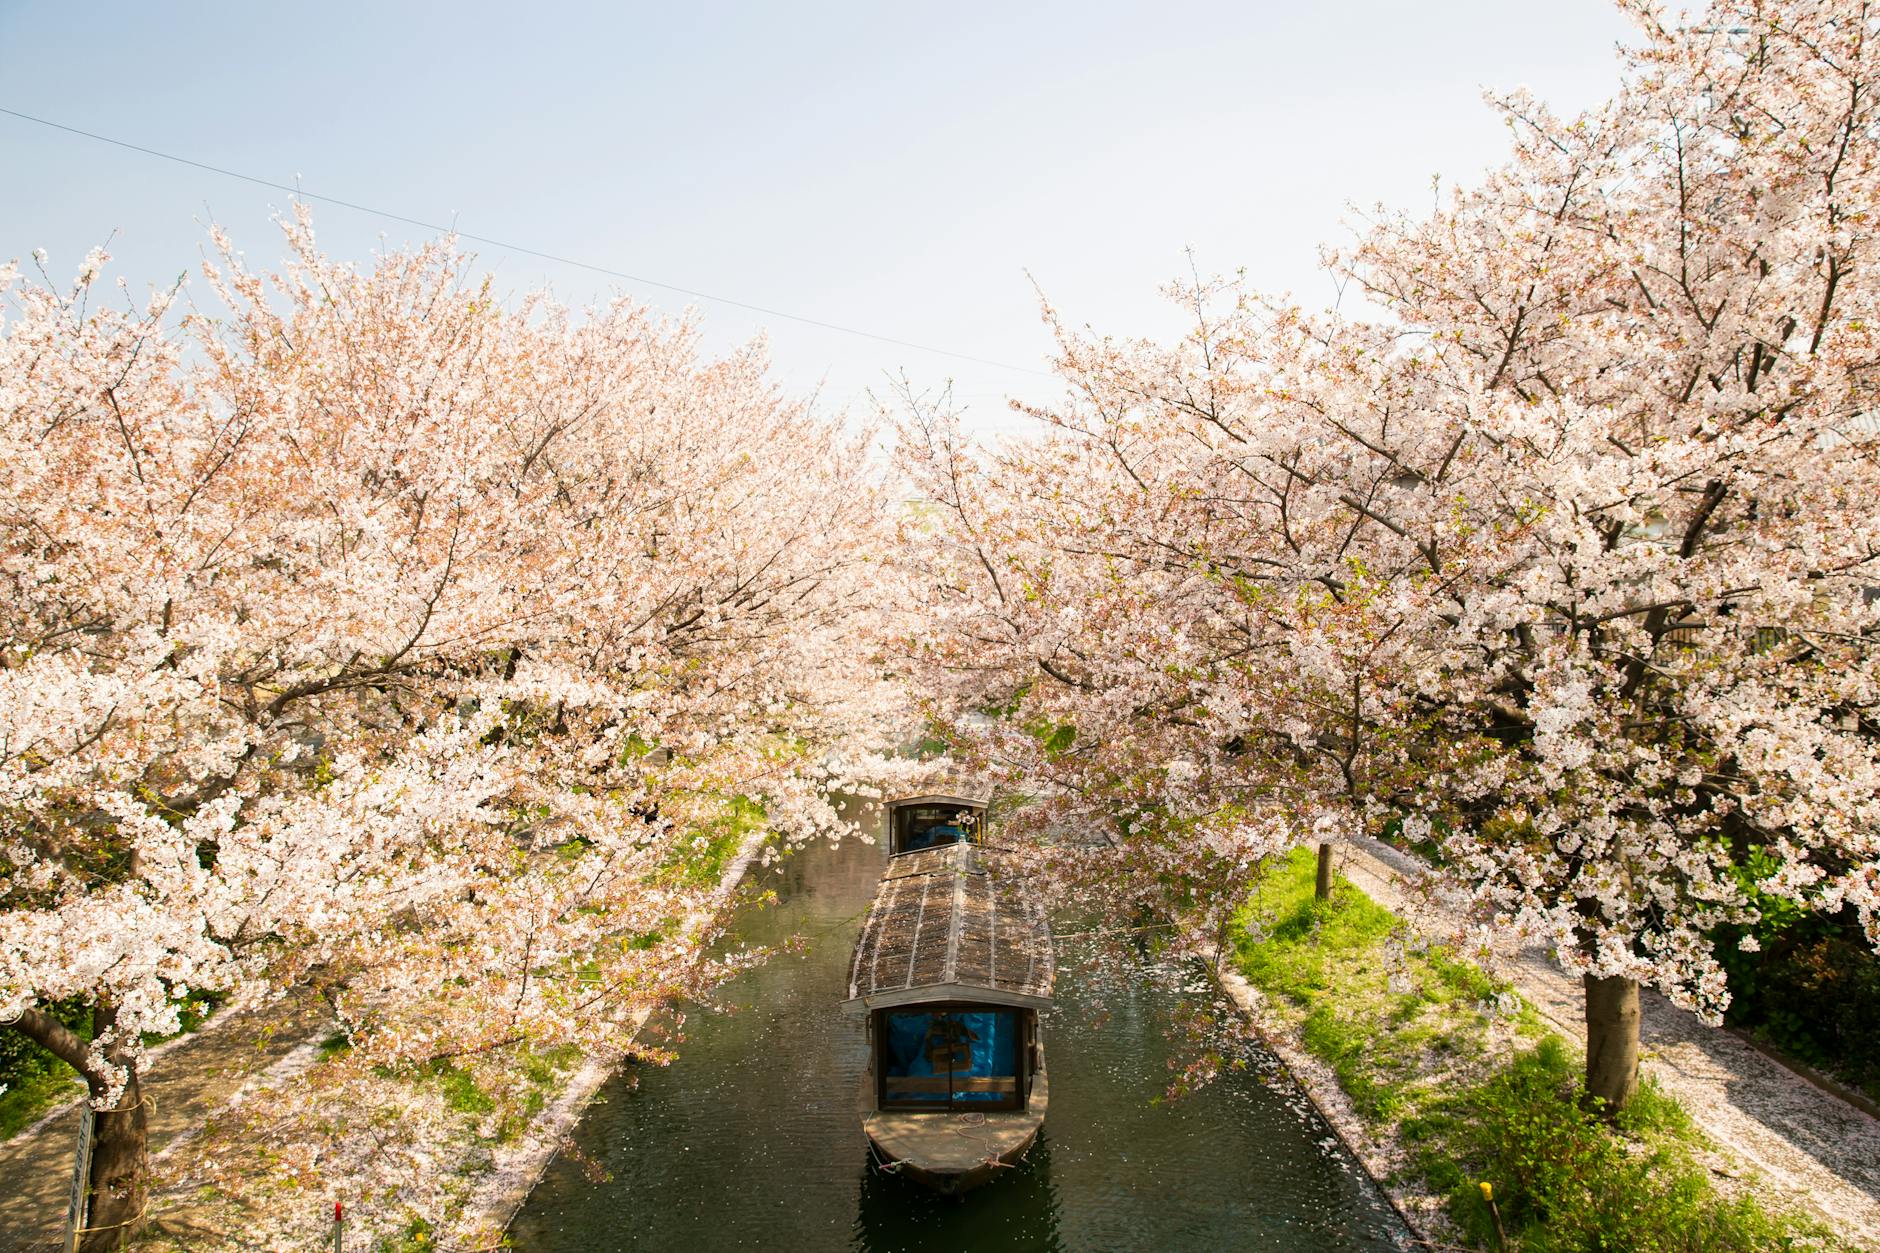 Roofed boat sailing on water channel between cherry blossom trees in Japan